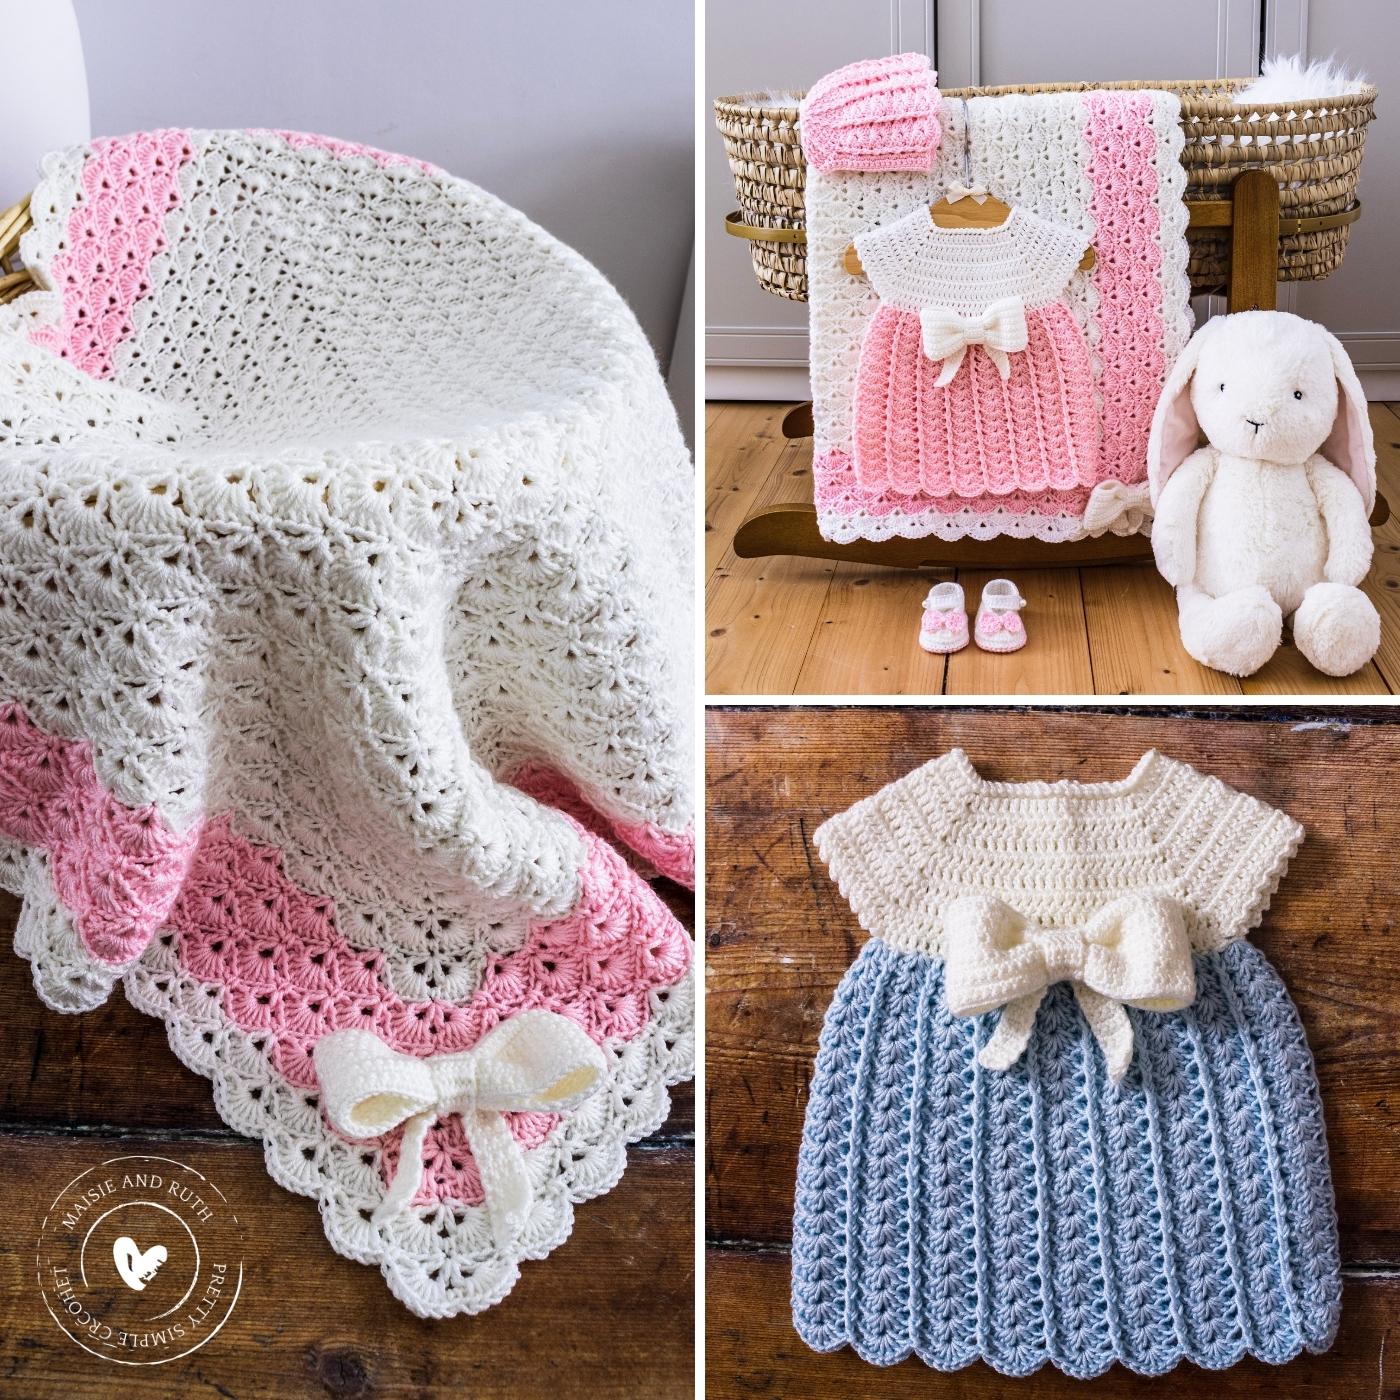 Crochet Simple 3D Bow on other baby items